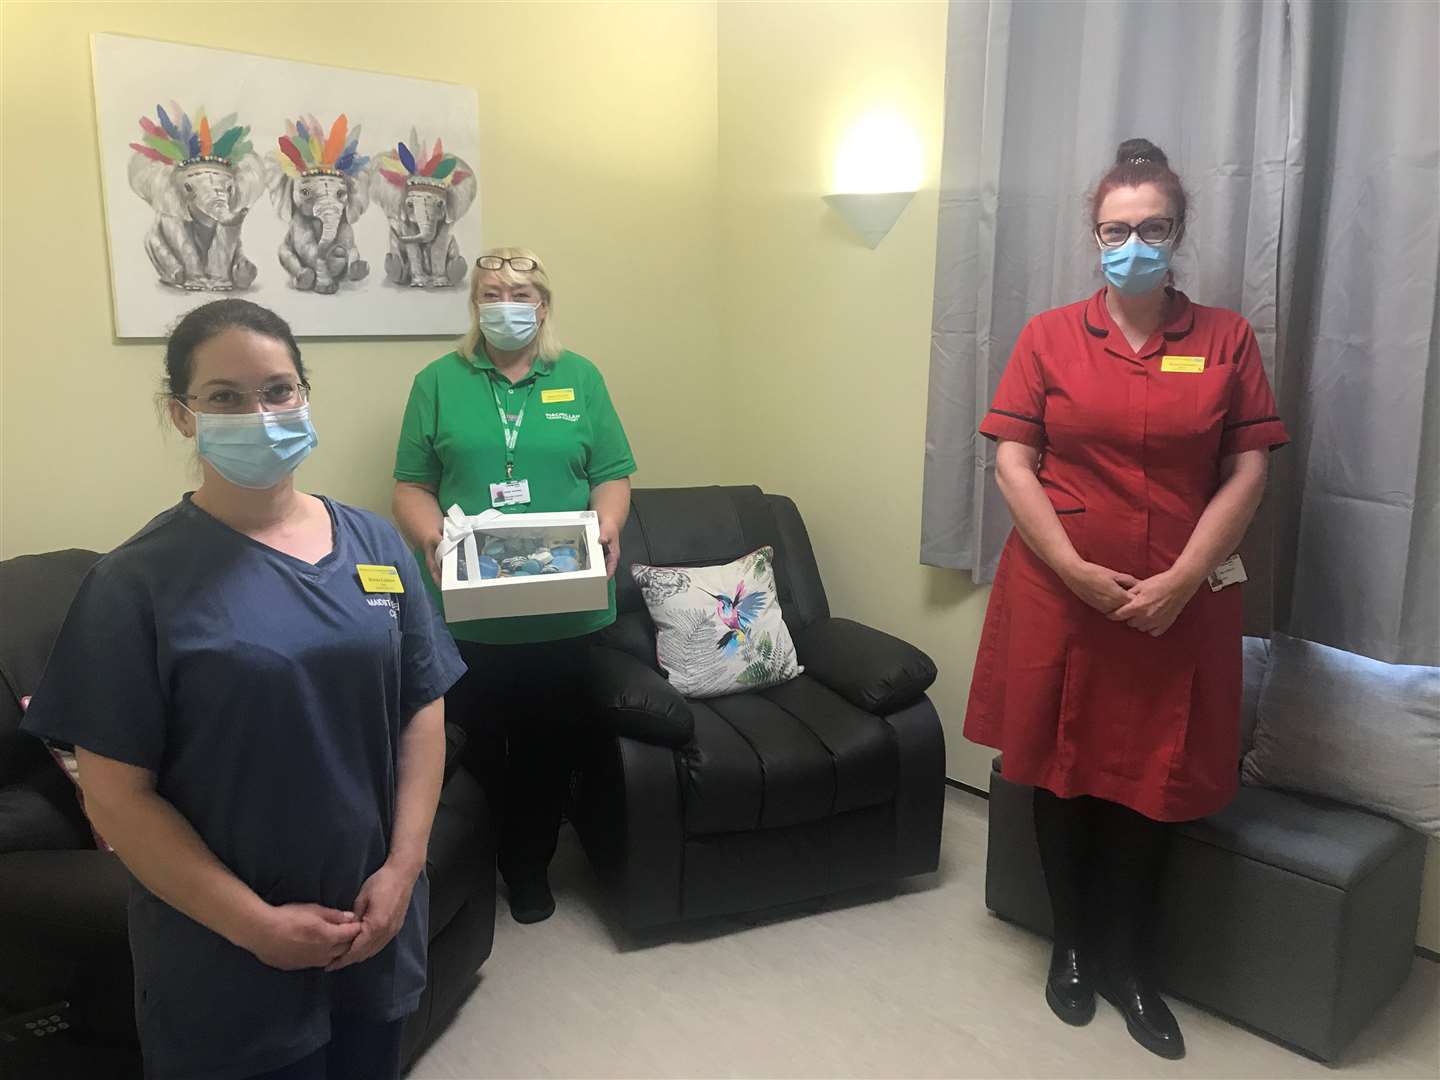 Maidstone Hospital worker Debbie Stansfield, centre, along with Matron for ICU Maria Crittenden and hospital sister Monika Kubikova in the spruced-up relatives' room